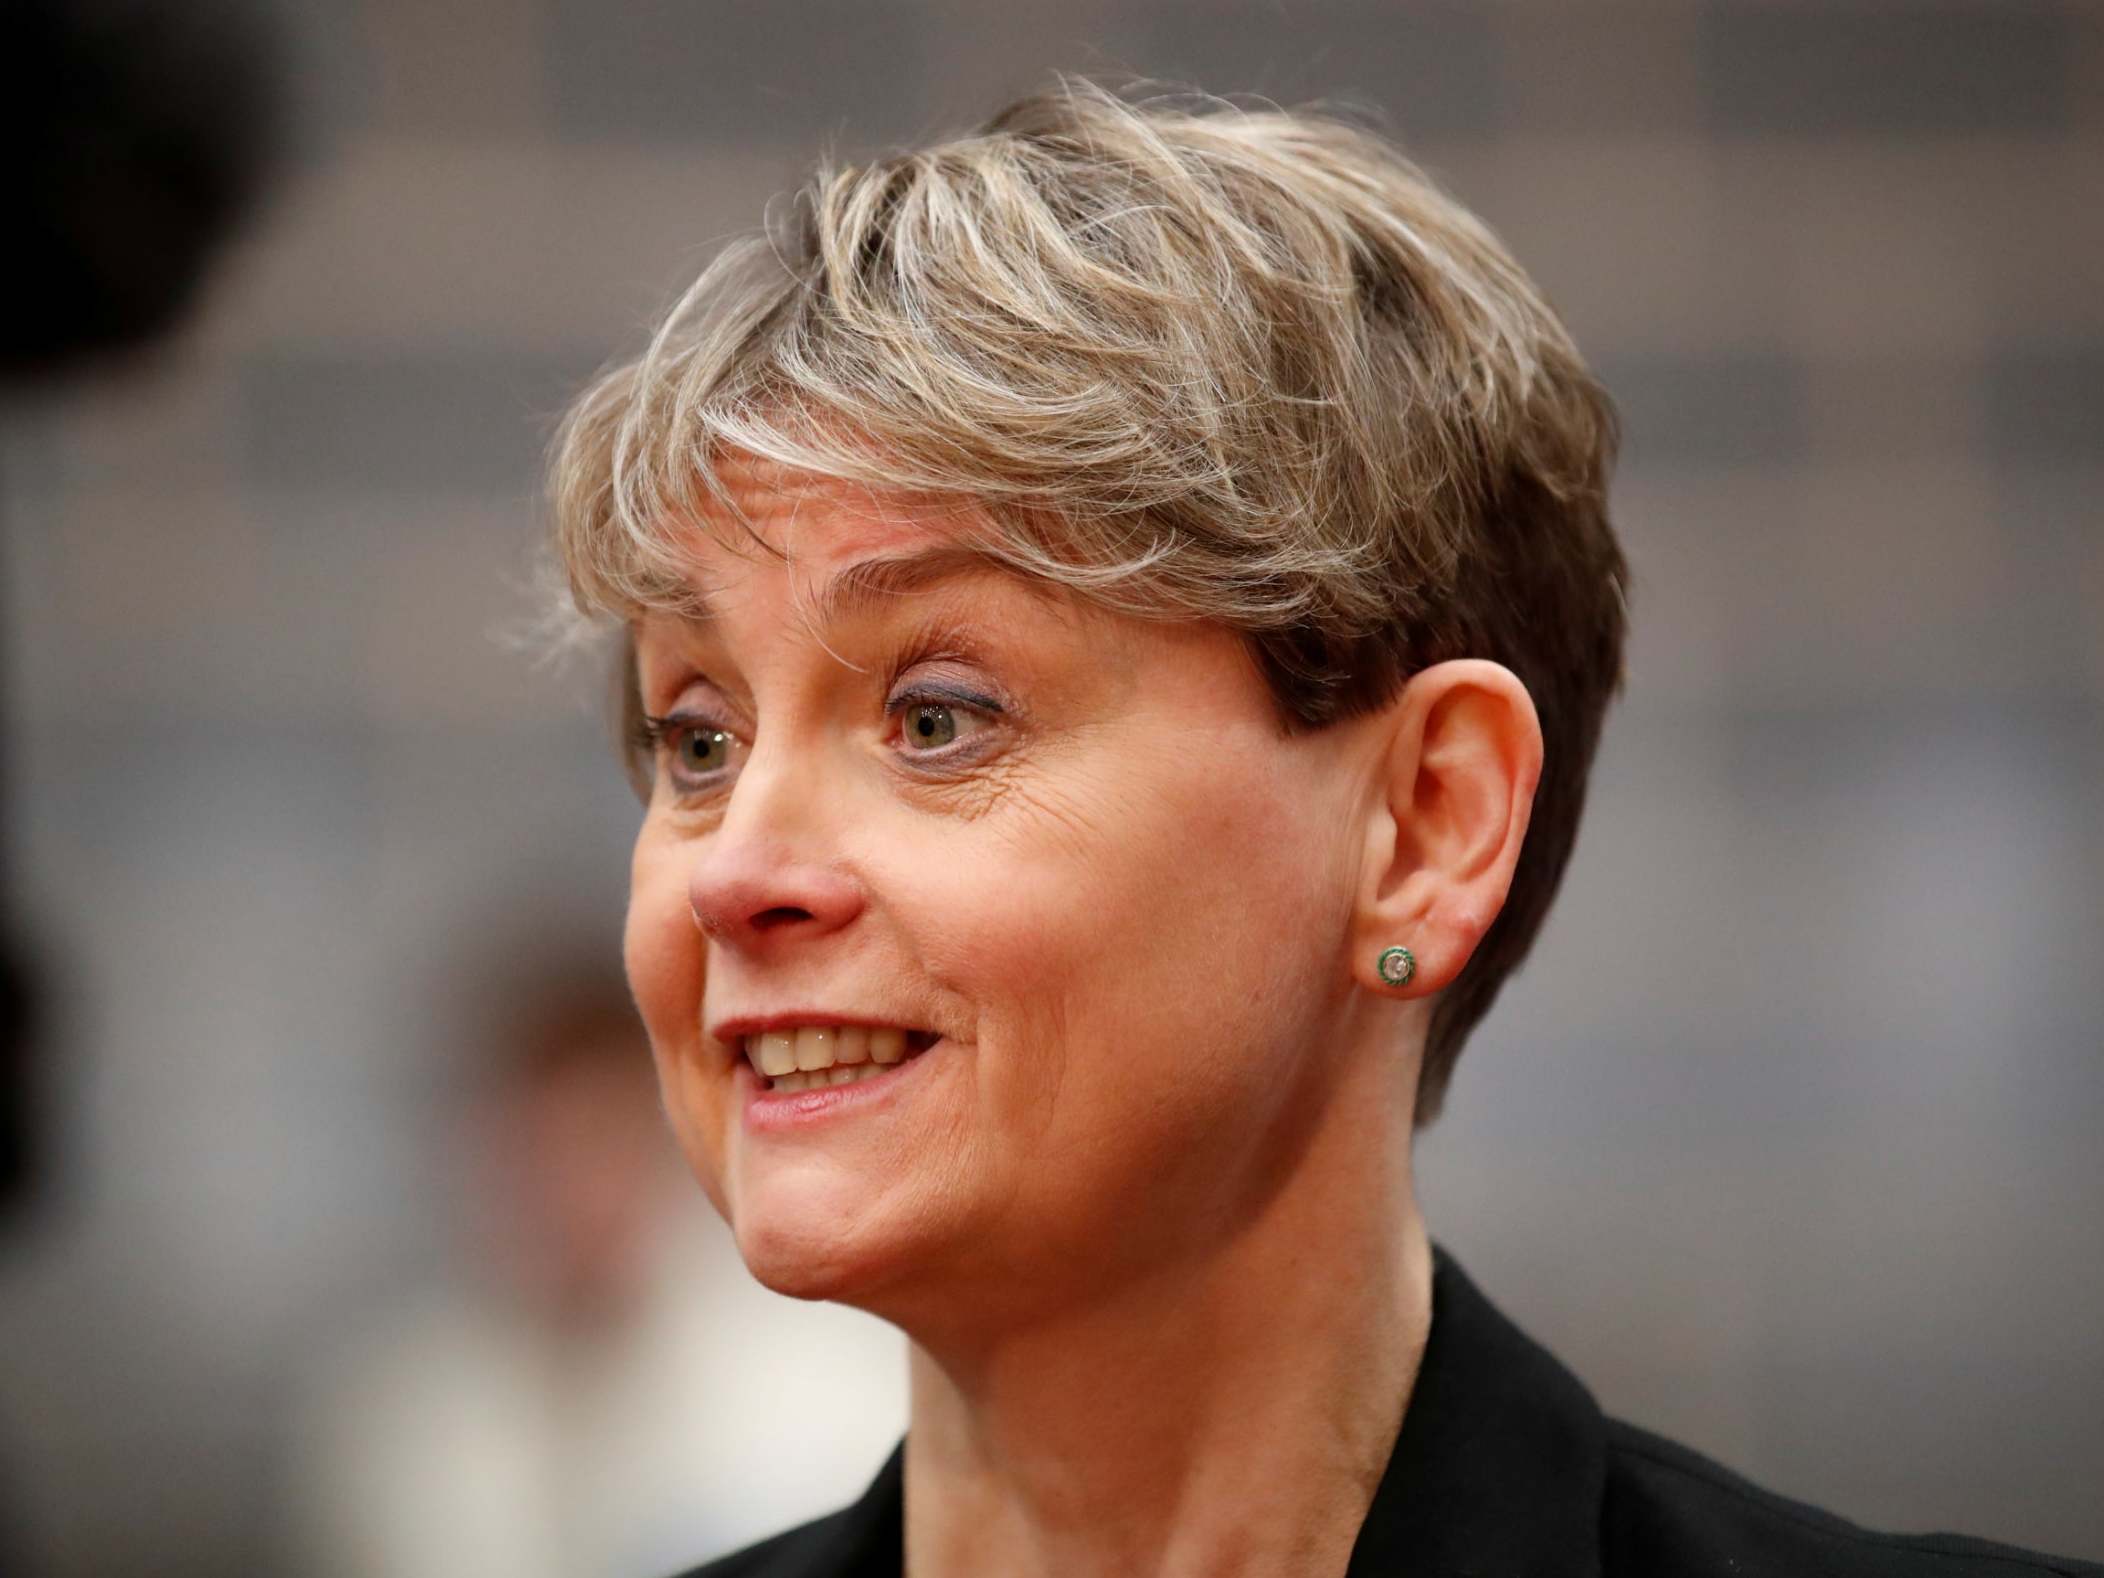 Yvette Cooper: Tory candidate jailed over threatening messages claiming he would pay 'crackheads' to harm Labour MP 